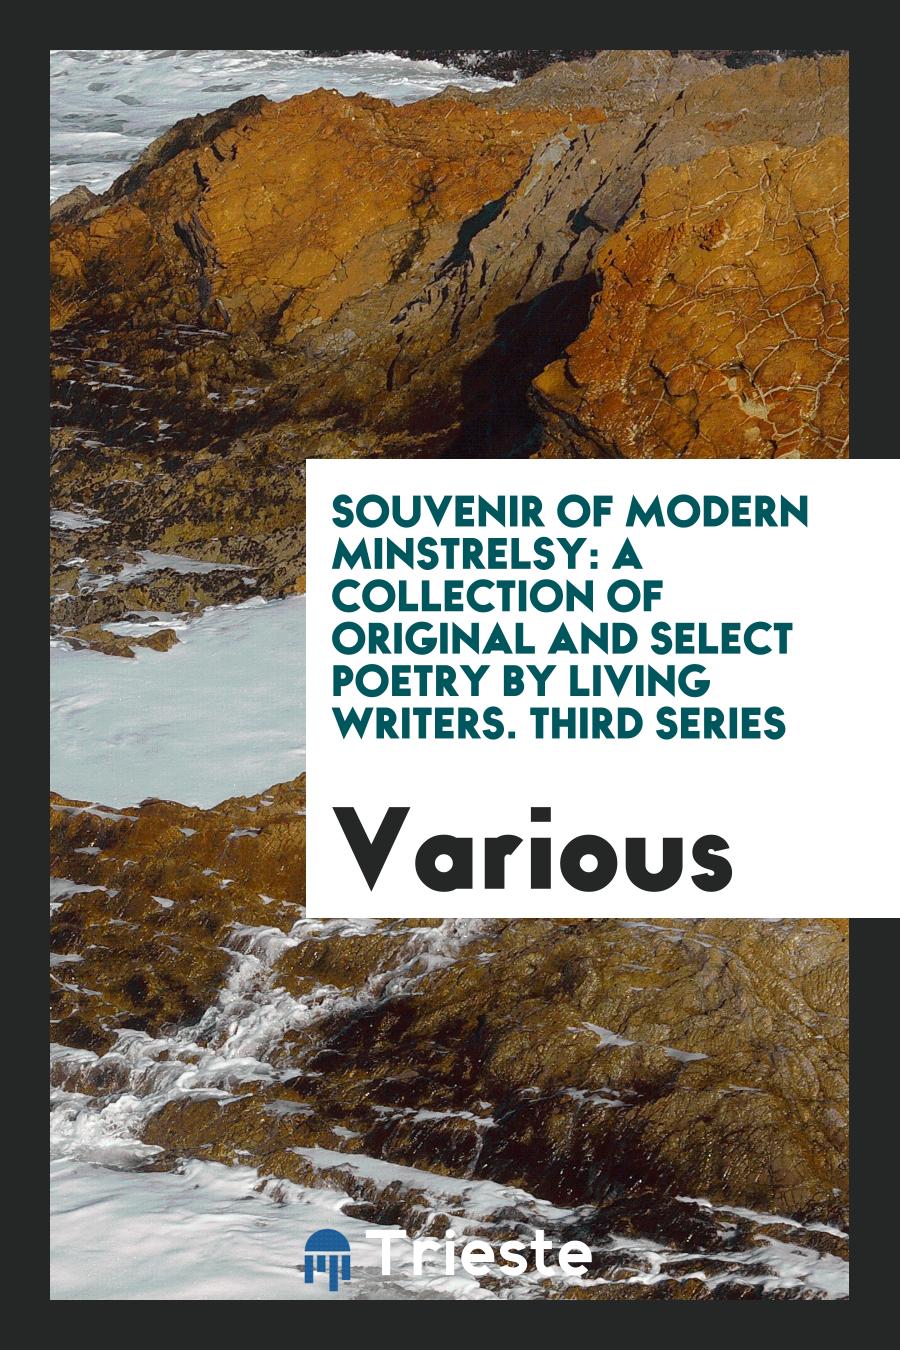 Souvenir of Modern Minstrelsy: A Collection of Original and Select Poetry by Living Writers. Third Series